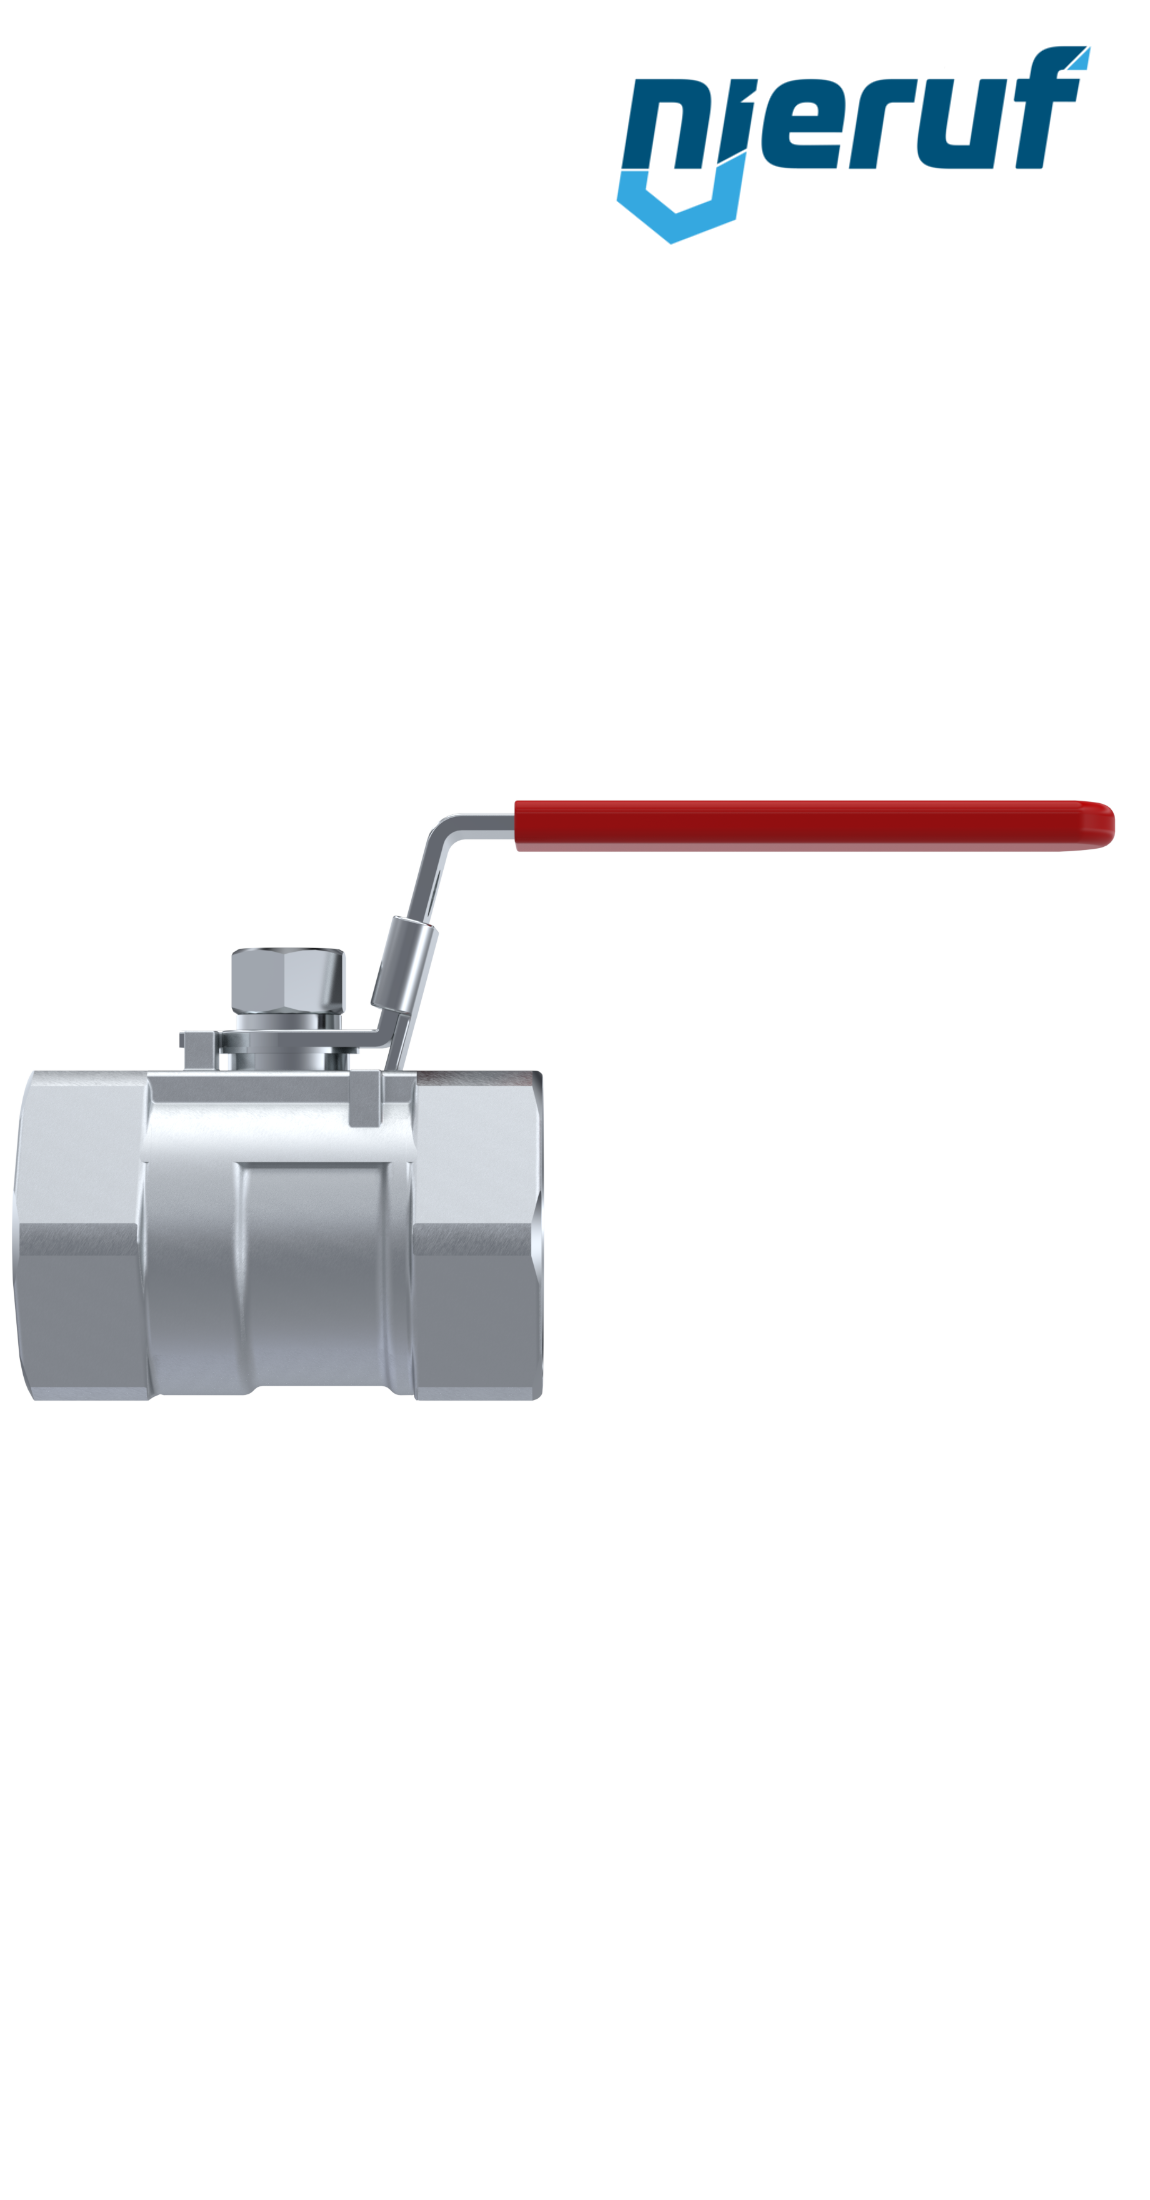 ball valve made of stainless steel DN15 - 1/2" inch GK03